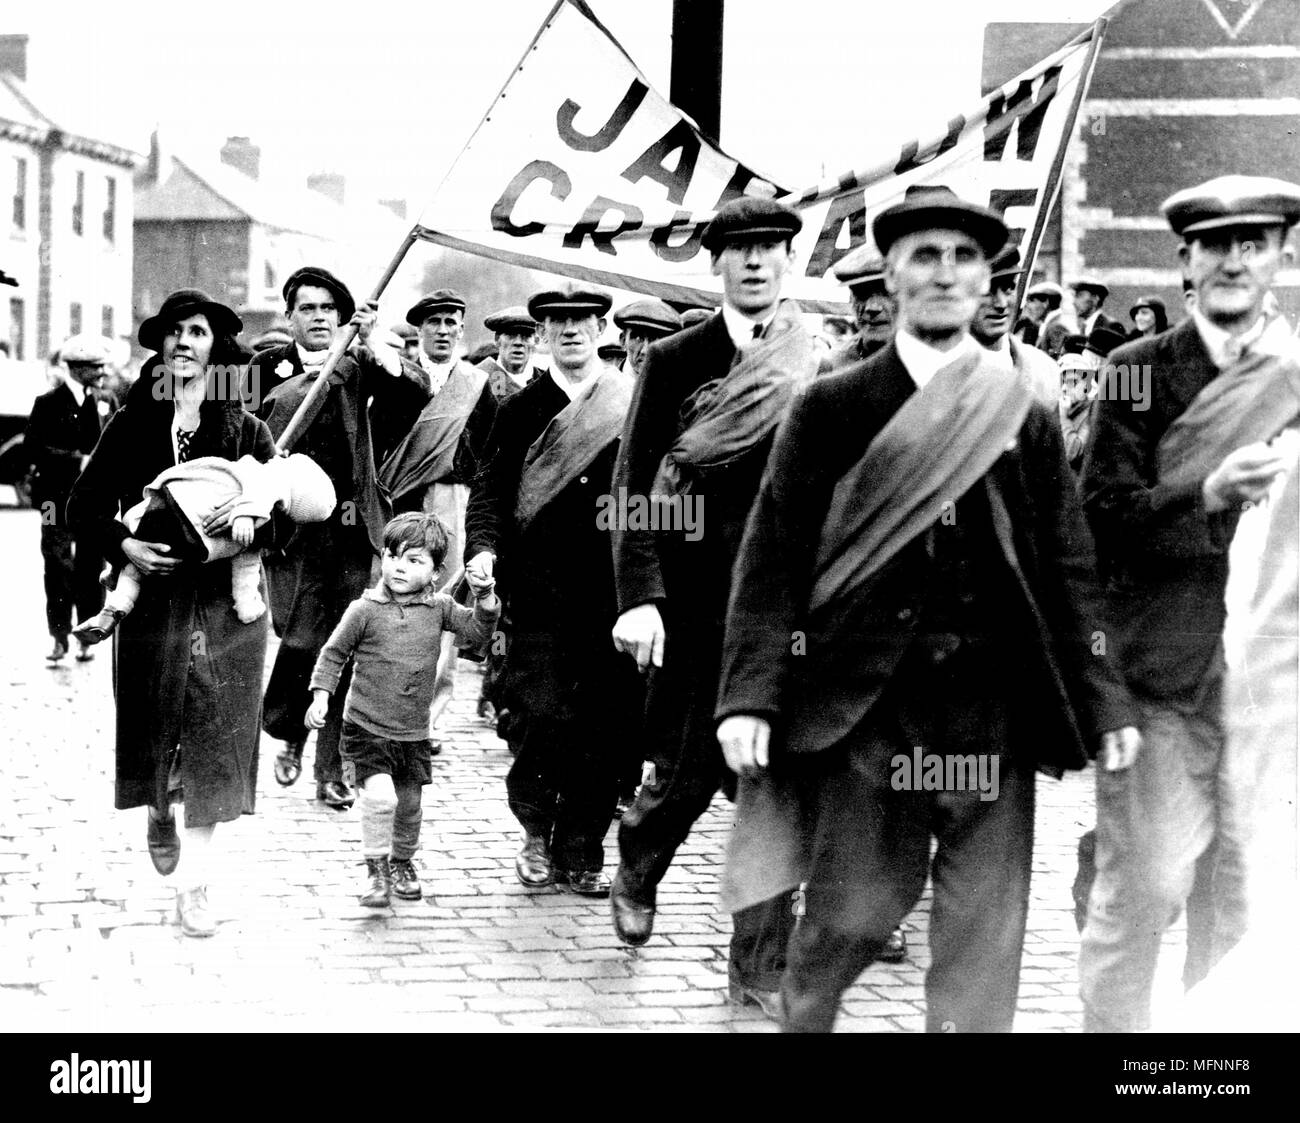 Great Depression 1929-1936. Jarrow March of unemployed miners and shipbuilders from North East England set out on 5 October 1936 to march the 280 miles (451 km) to London to petition Parliament for relief and the creation of jobs. Stock Photo